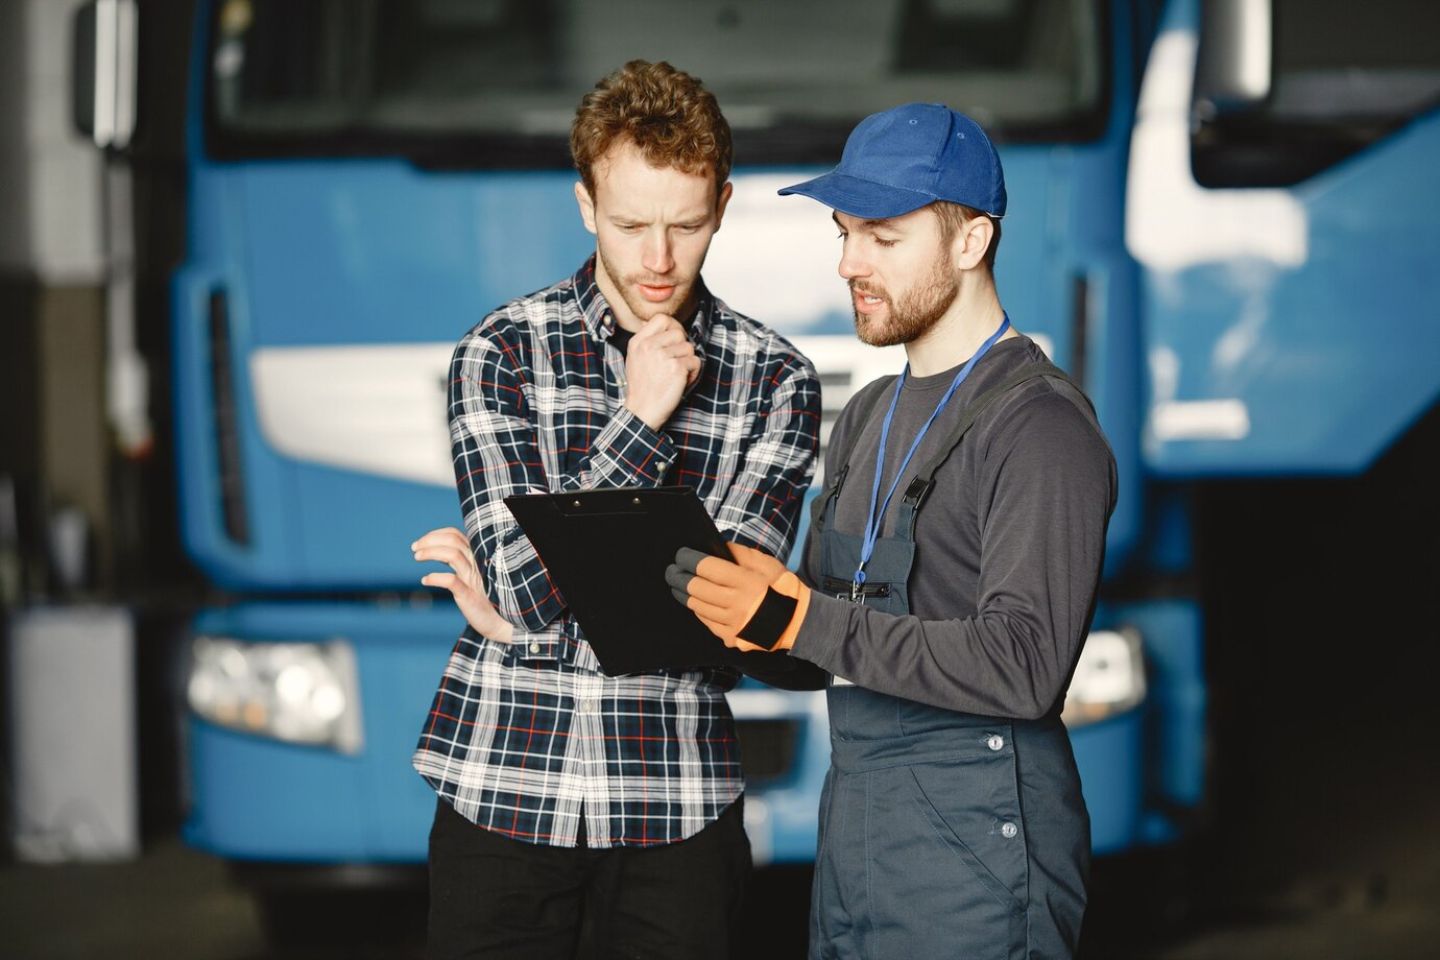 What Are California’s Commercial Truck Requirements for Insurance